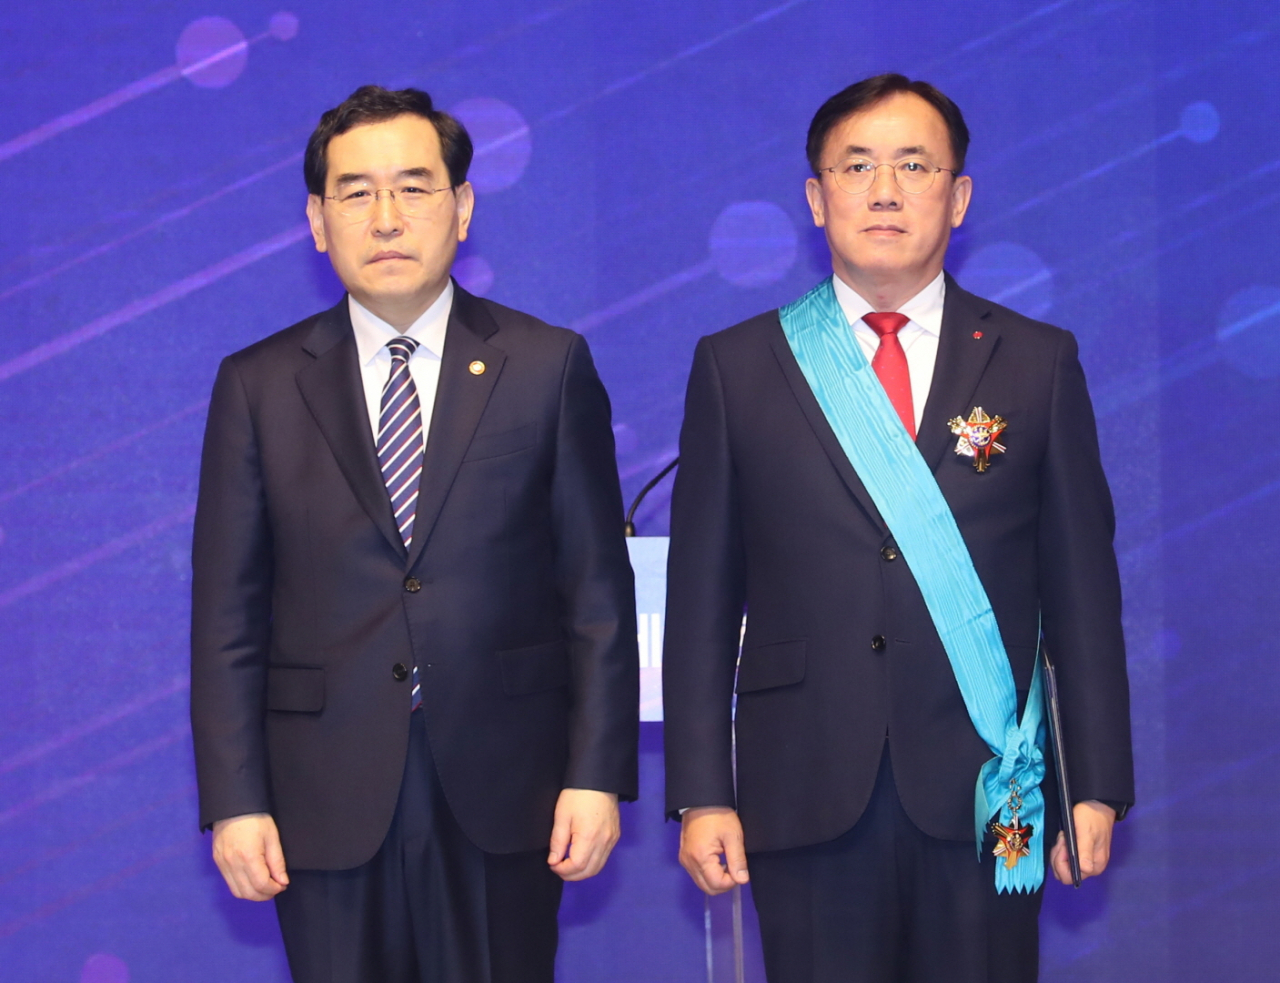 LG Innotek CEO Jeong Cheol-dong (right) poses with Minister of Industry, Trade and Energy Lee Chang-yang after receiving the Gold Tower Order of Industrial Service Merit at the annual Trade Day ceremony in Seoul, Wednesday. (LG Innotek)